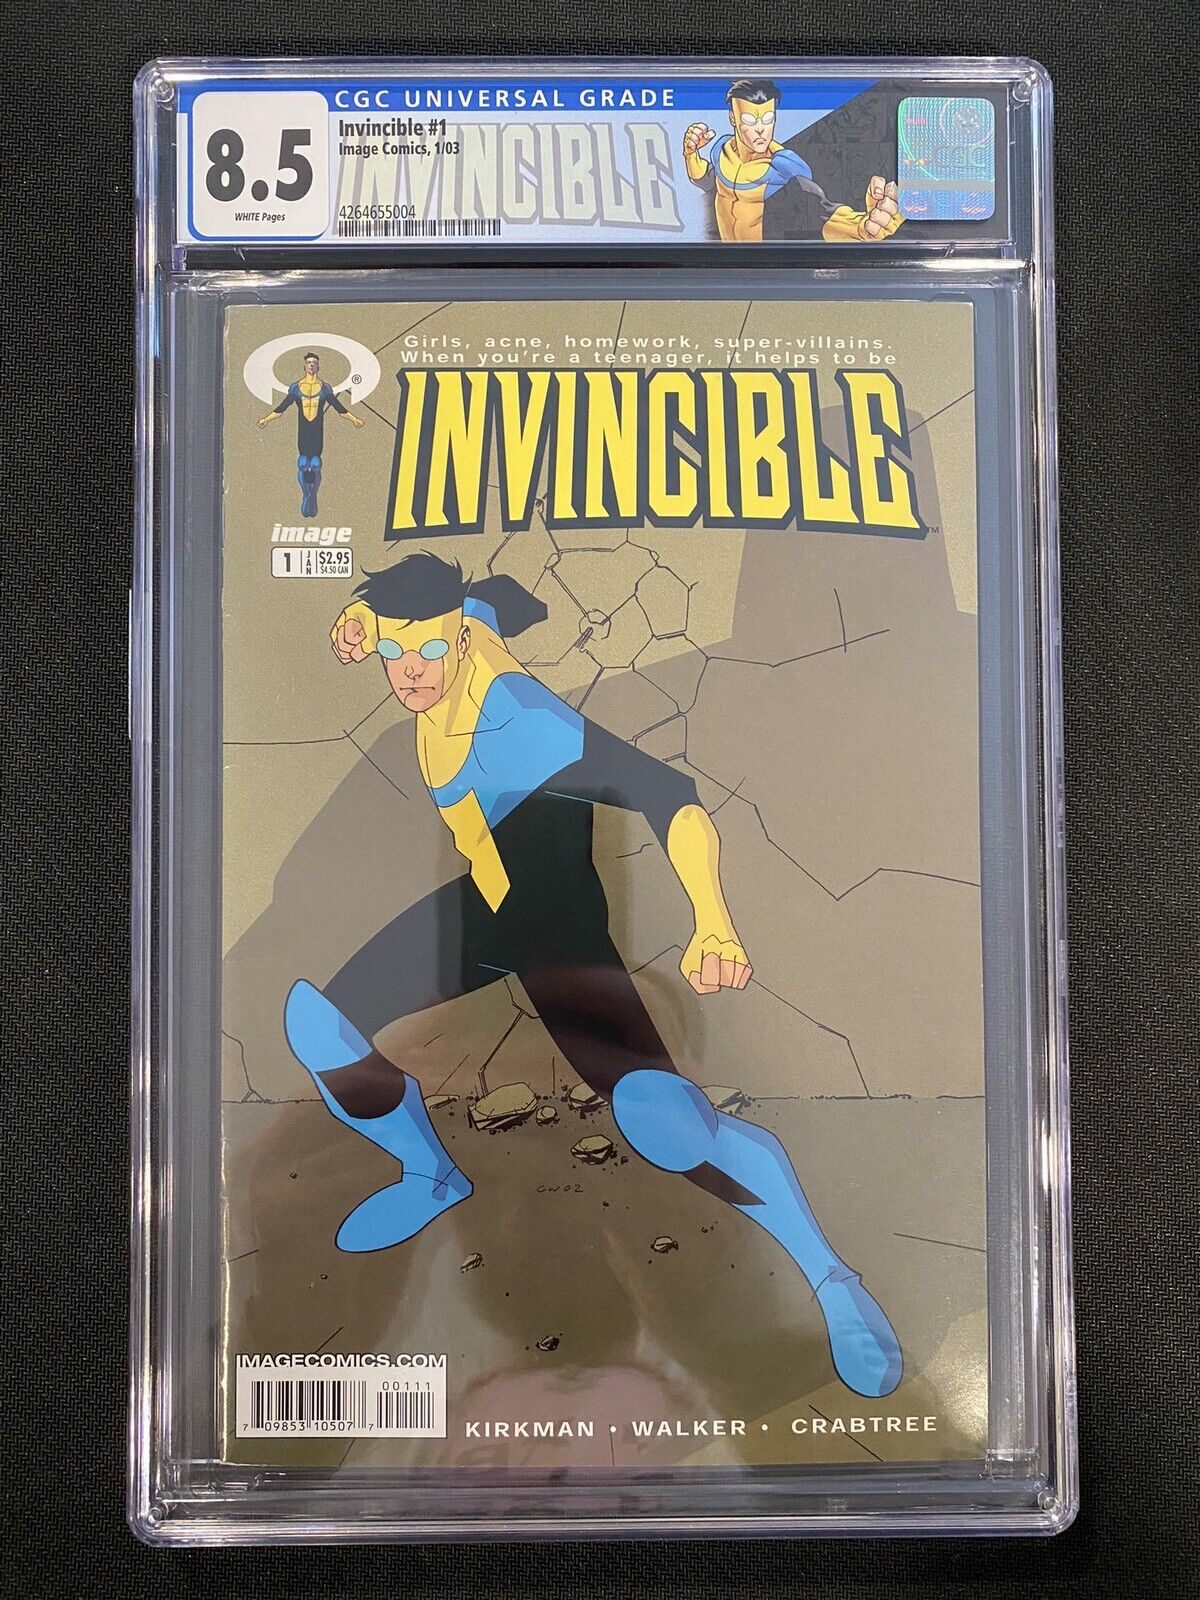 Invincible by Kirkman from Image Near Full Run #1-144 CGC 8.5 VF/NM